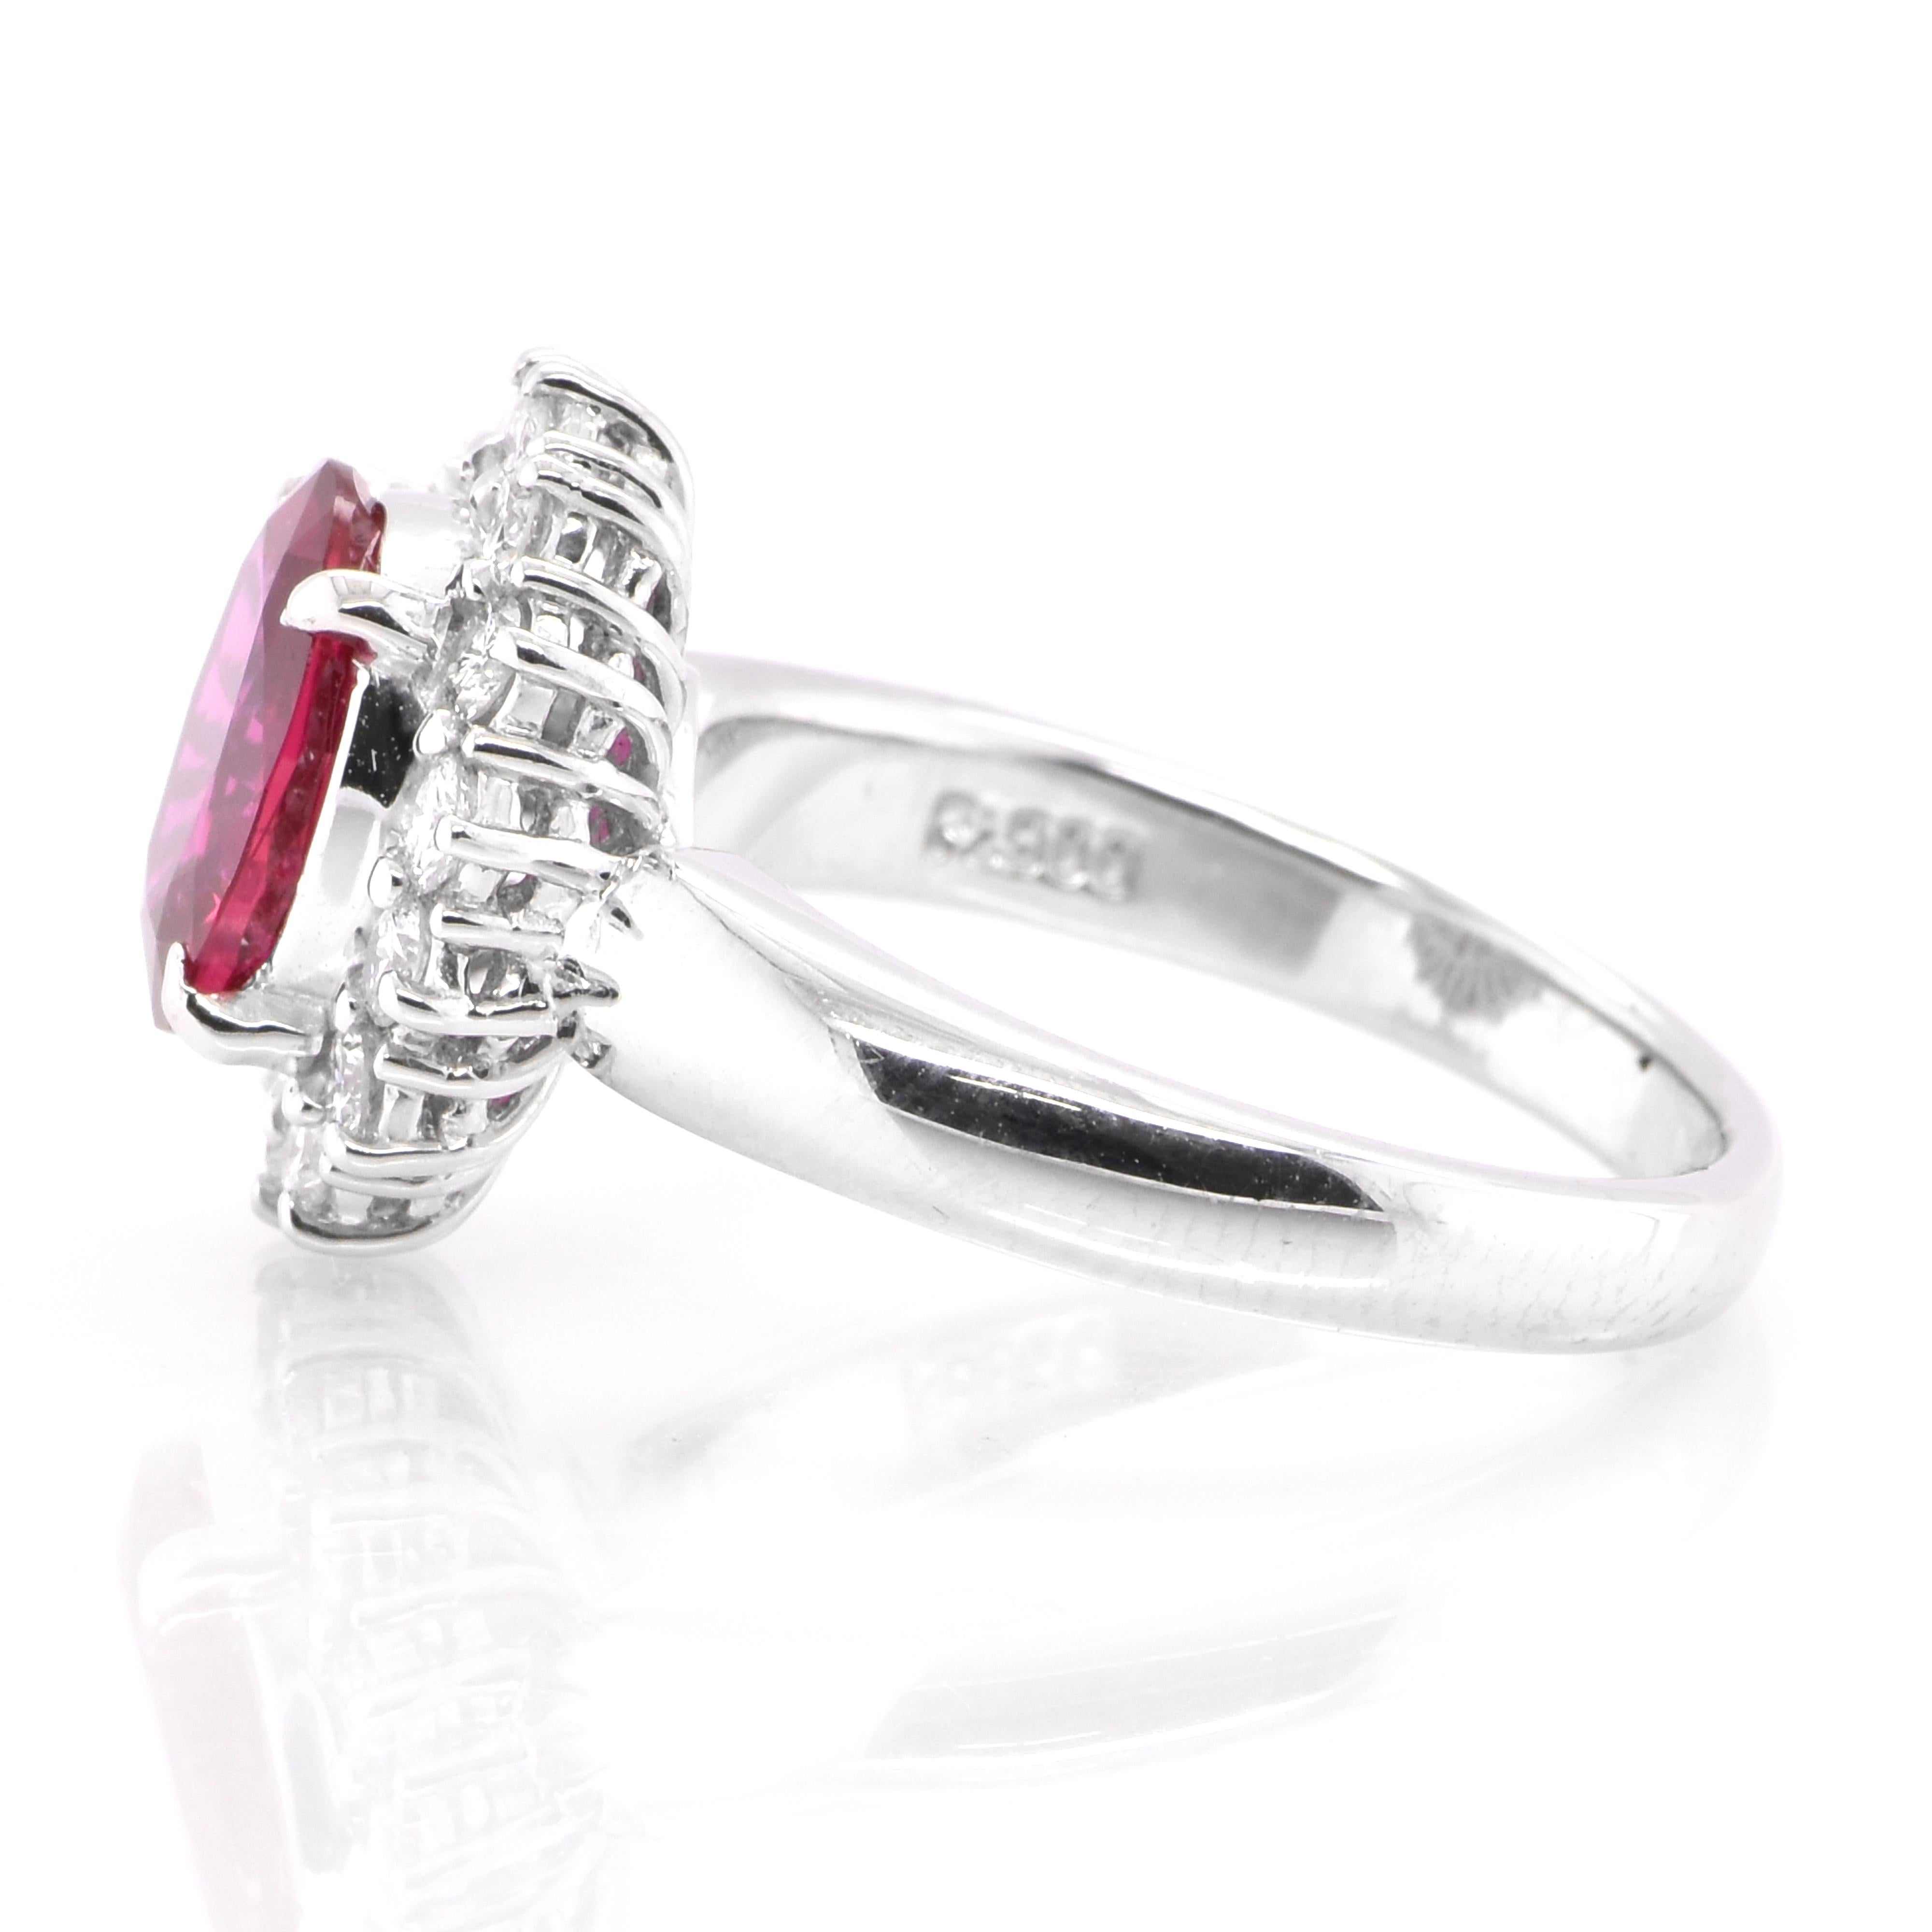 Oval Cut GIA Certified 2.17 Carat Unheated, African Ruby & Diamond Ring Set in Platinum For Sale